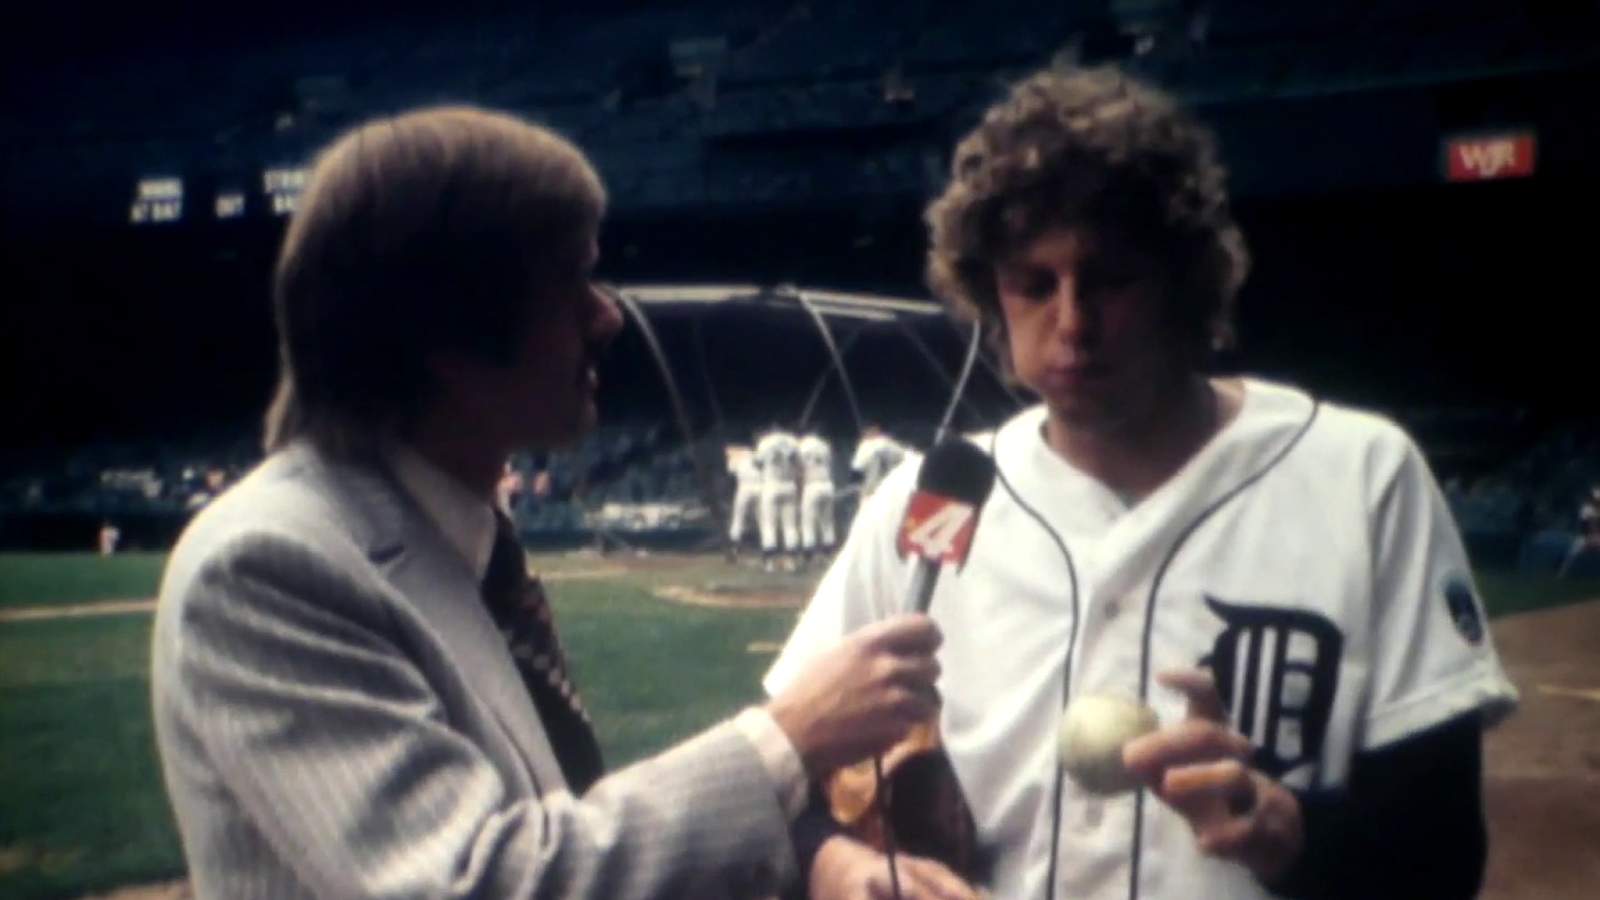 Are you talking only to the baseball?: Check out this interview with a rookie Mark Fidrych